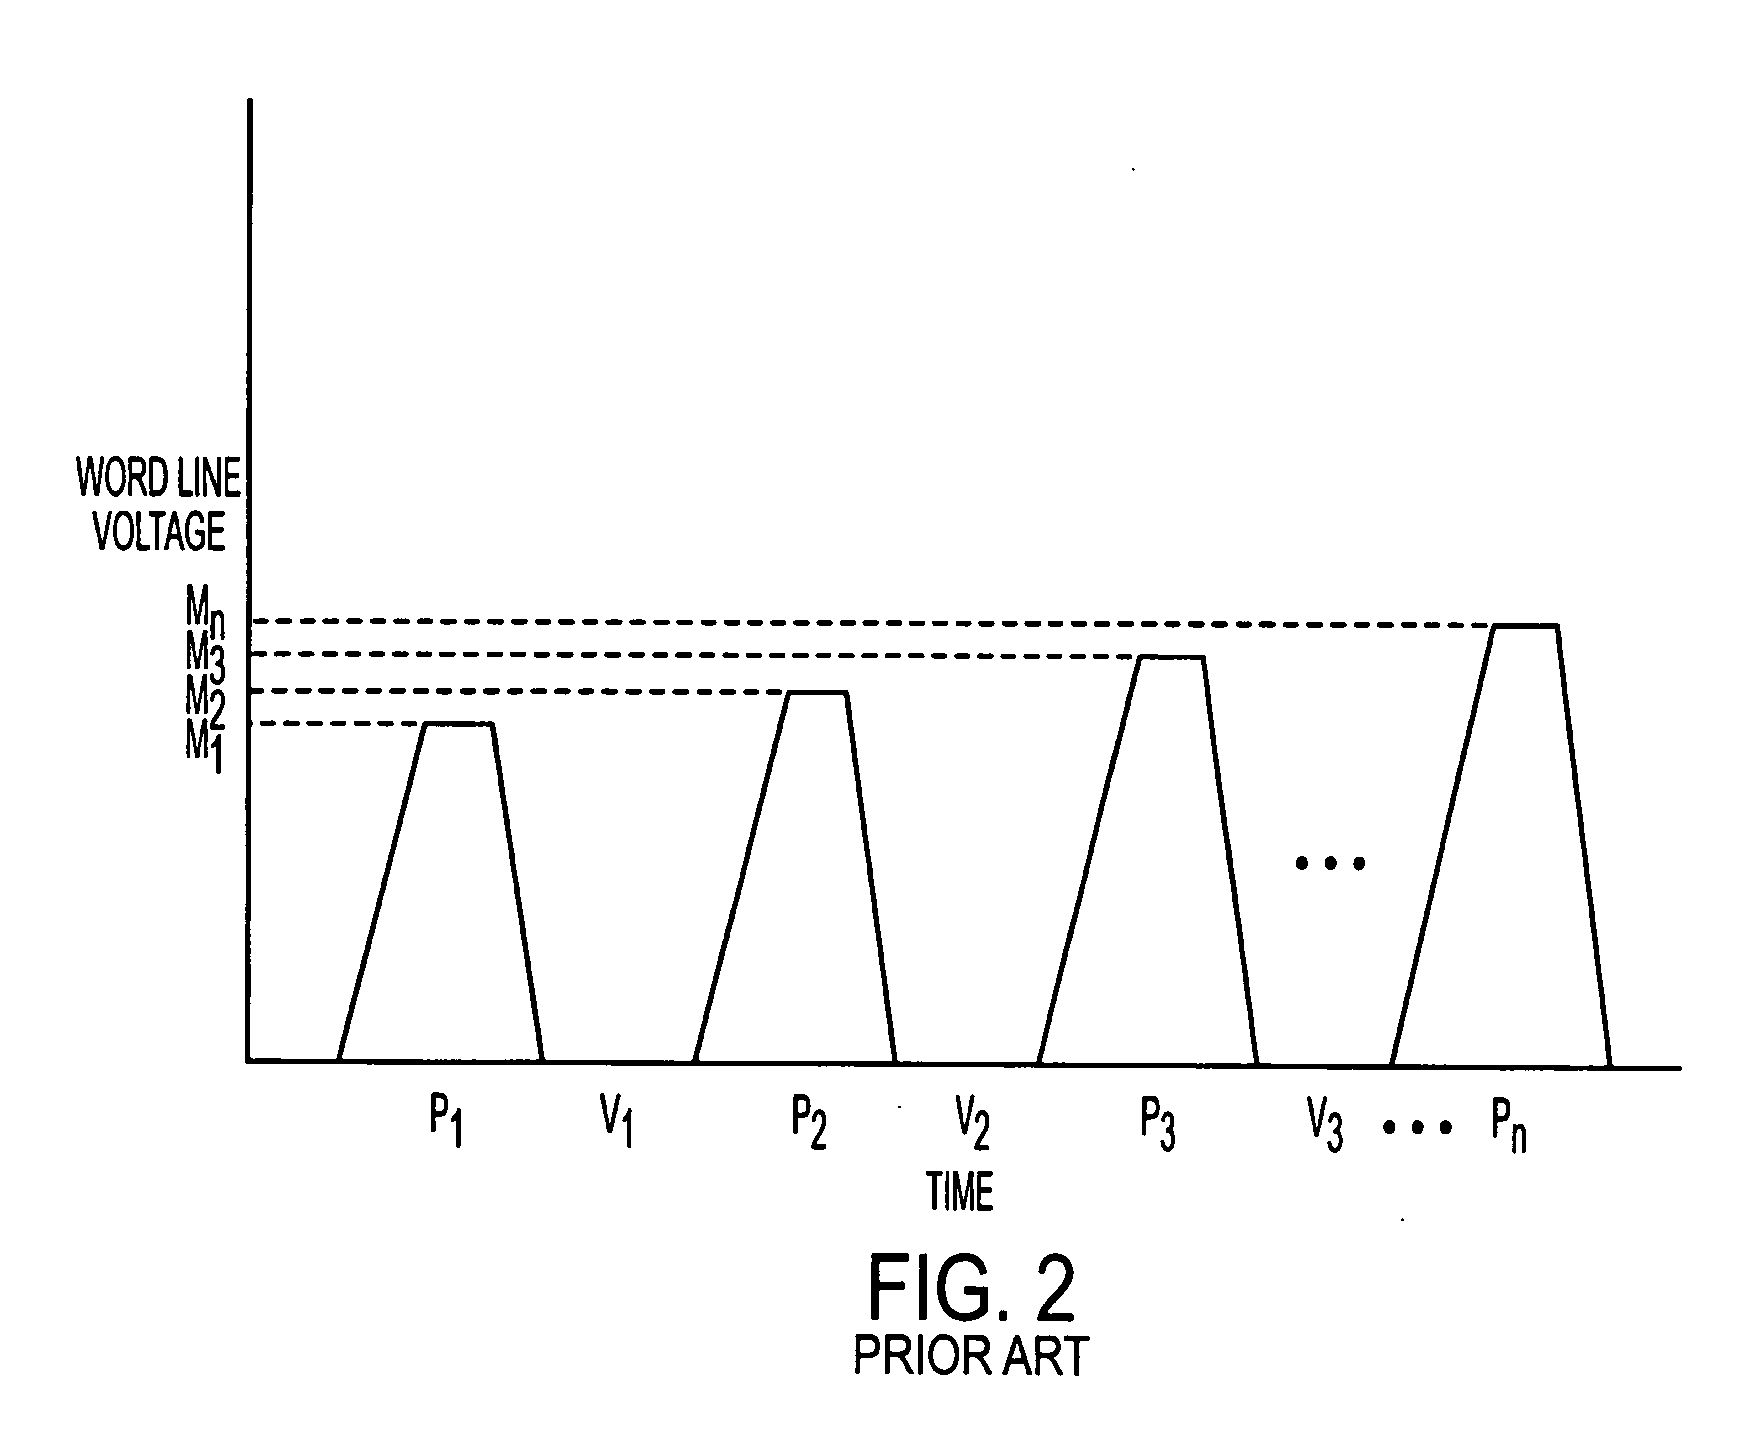 Method and apparatus for adaptive programming of flash memory, flash memory devices, and systems including flash memory having adaptive programming capability